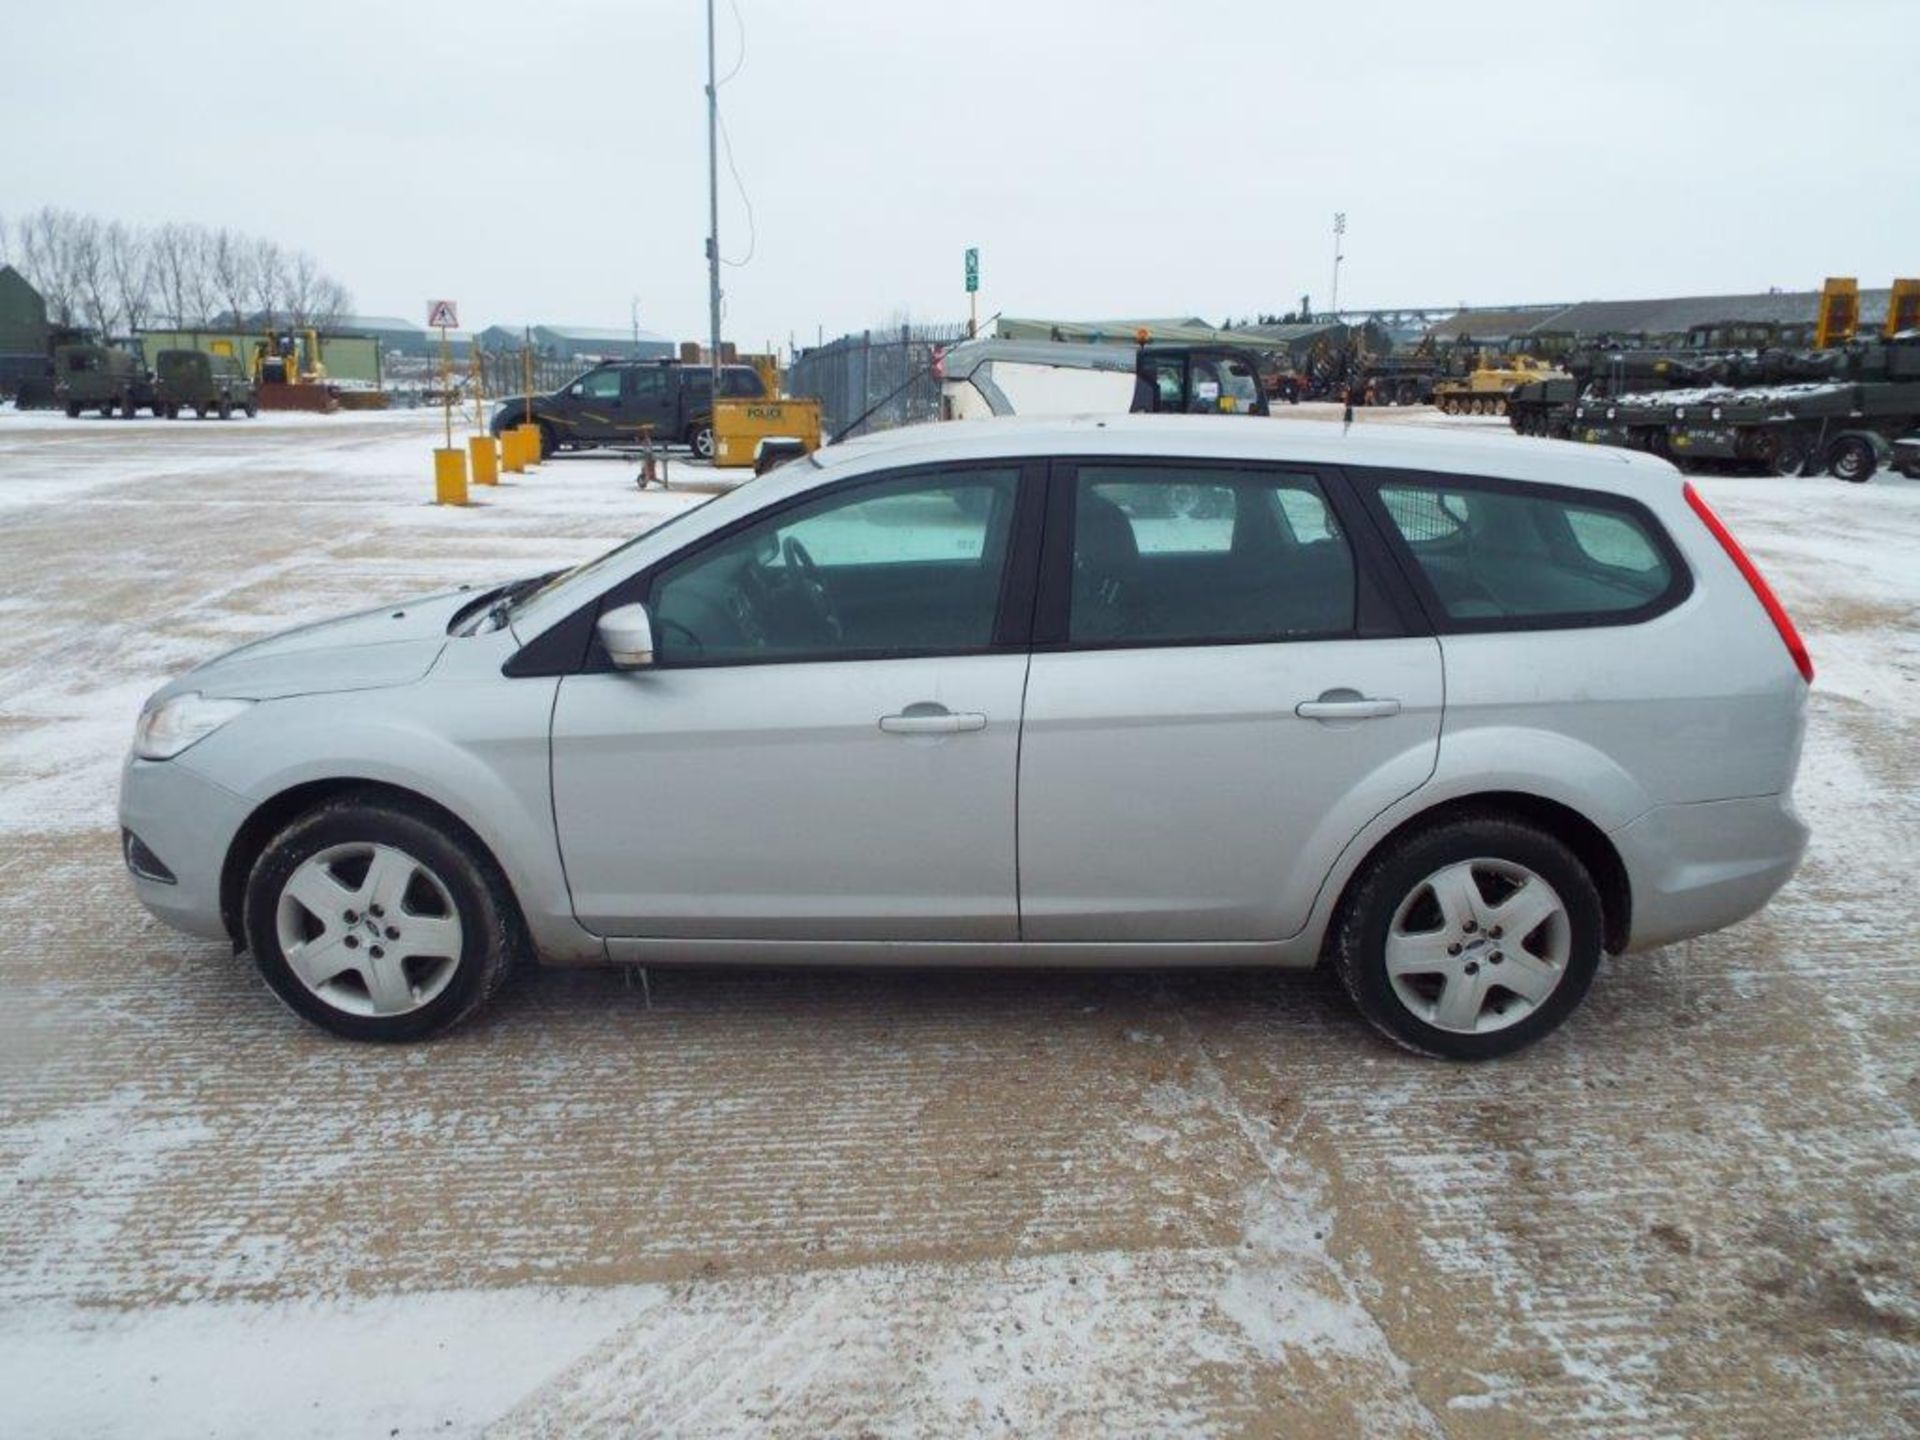 Ford Focus Style 1.8 TD 115 Estate - Only 25,174 Miles! - Image 4 of 21